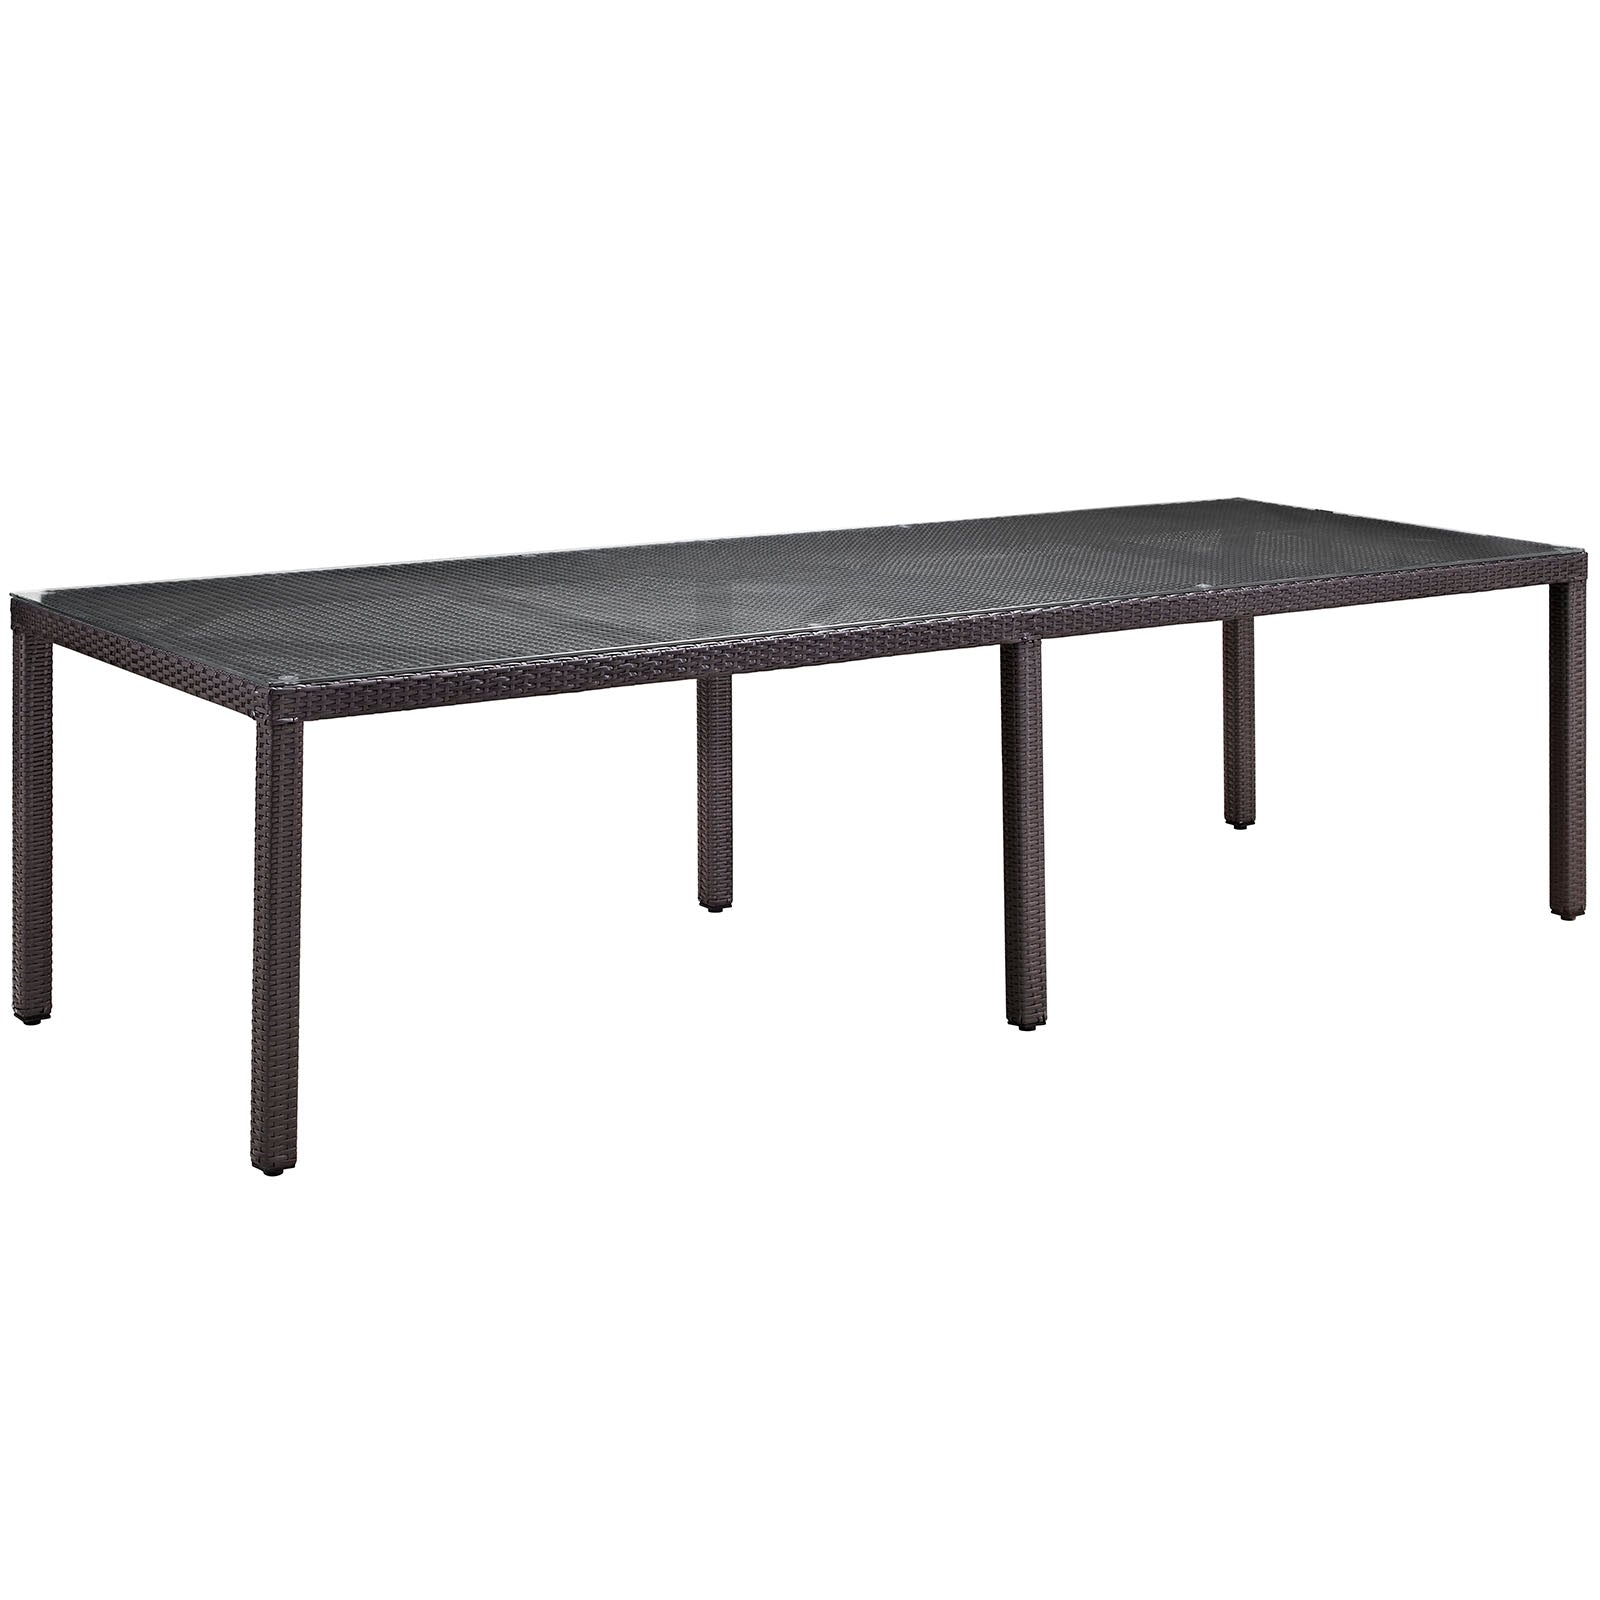 Modway Outdoor Dining Tables - Convene 114" Outdoor Dining Table Espresso